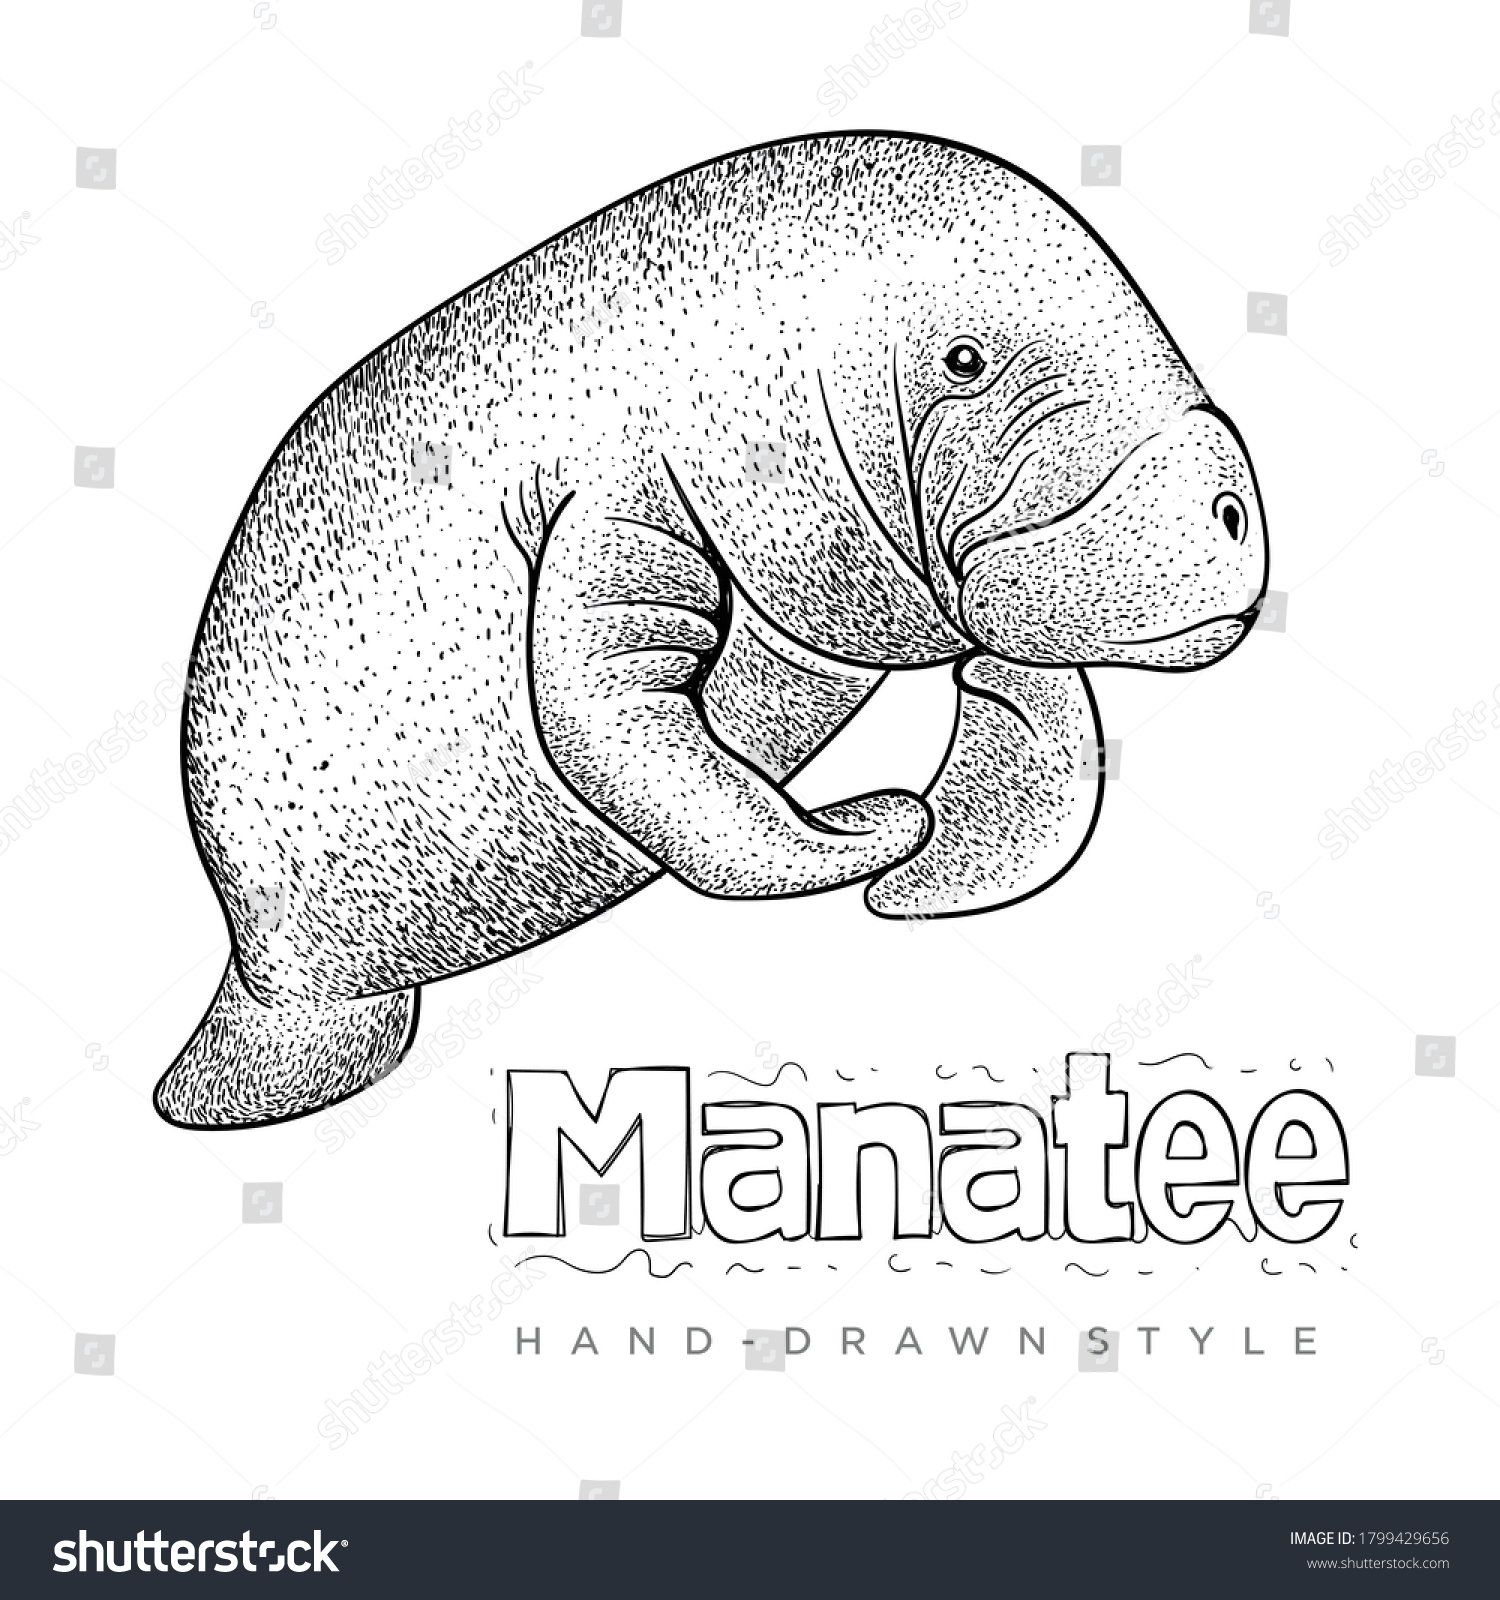 SVG of vector hand drawn style manatee. realistic animal illustrations svg